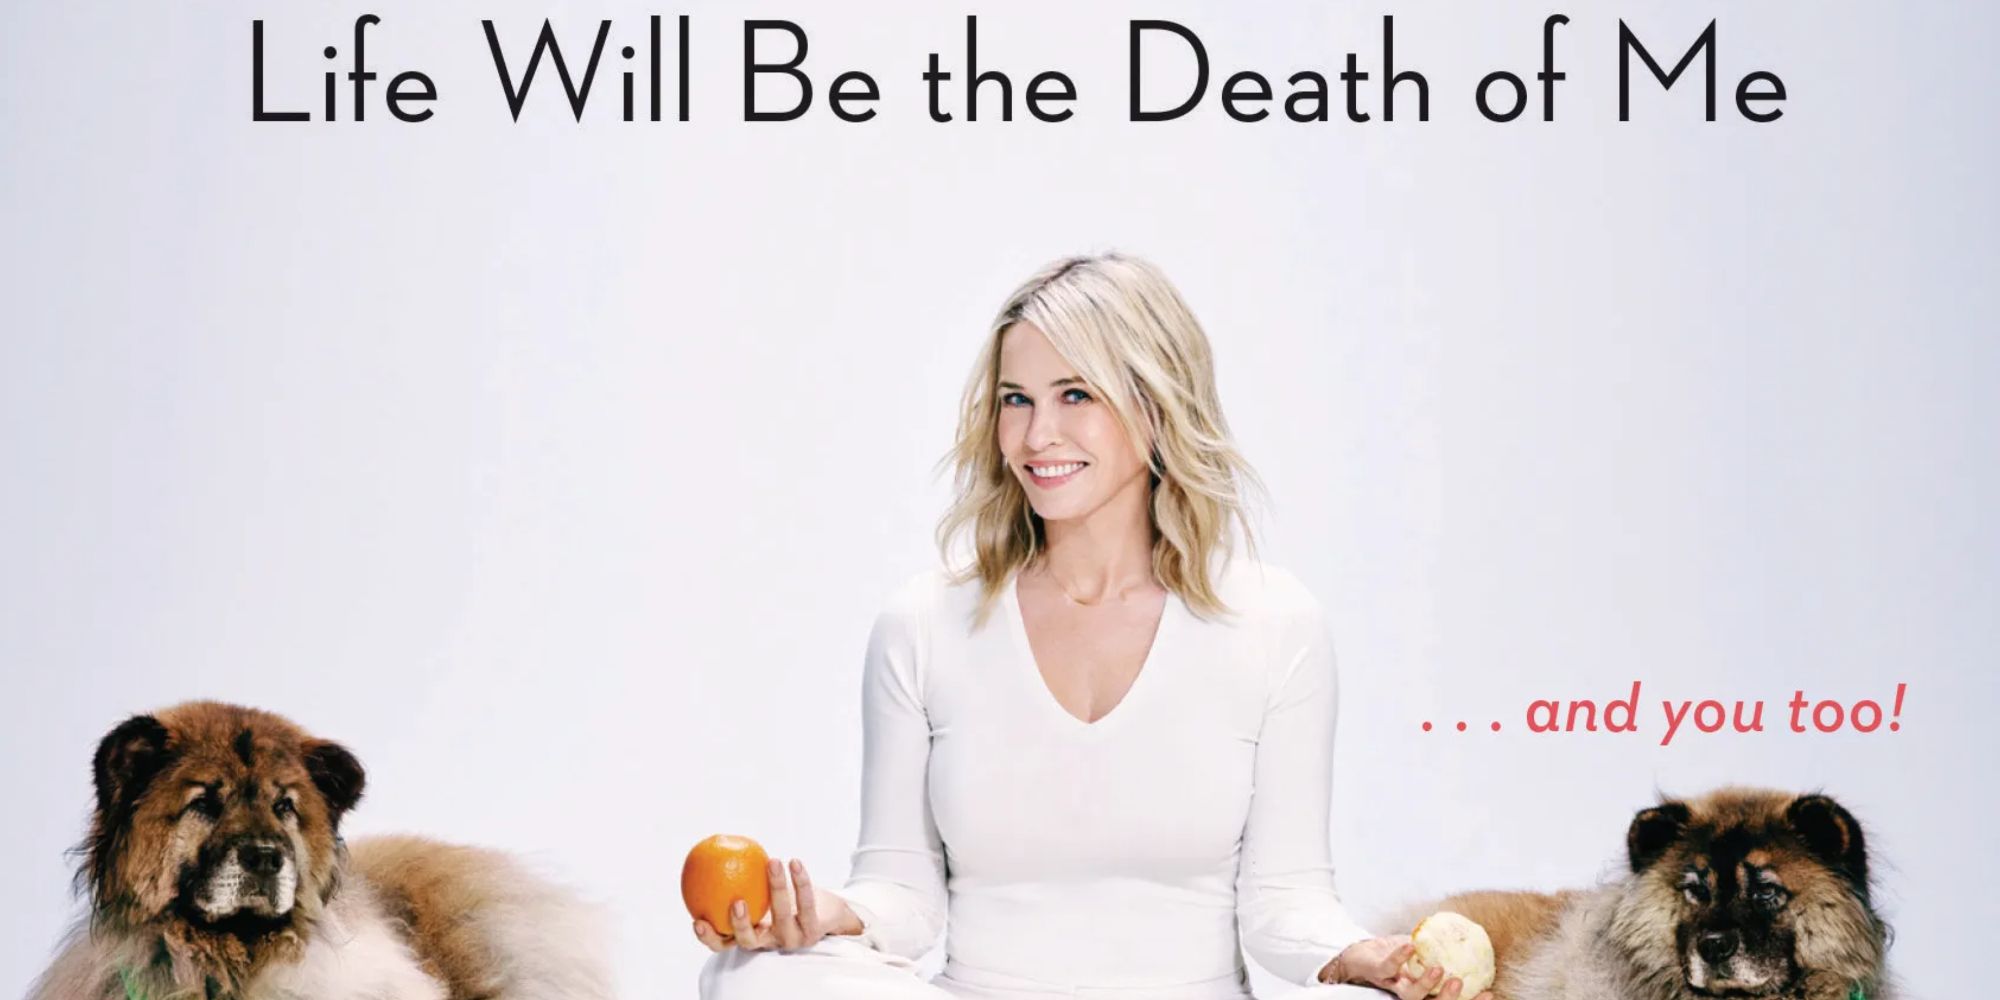 Chelsea Handler's Book Life Will Be the Death of Me